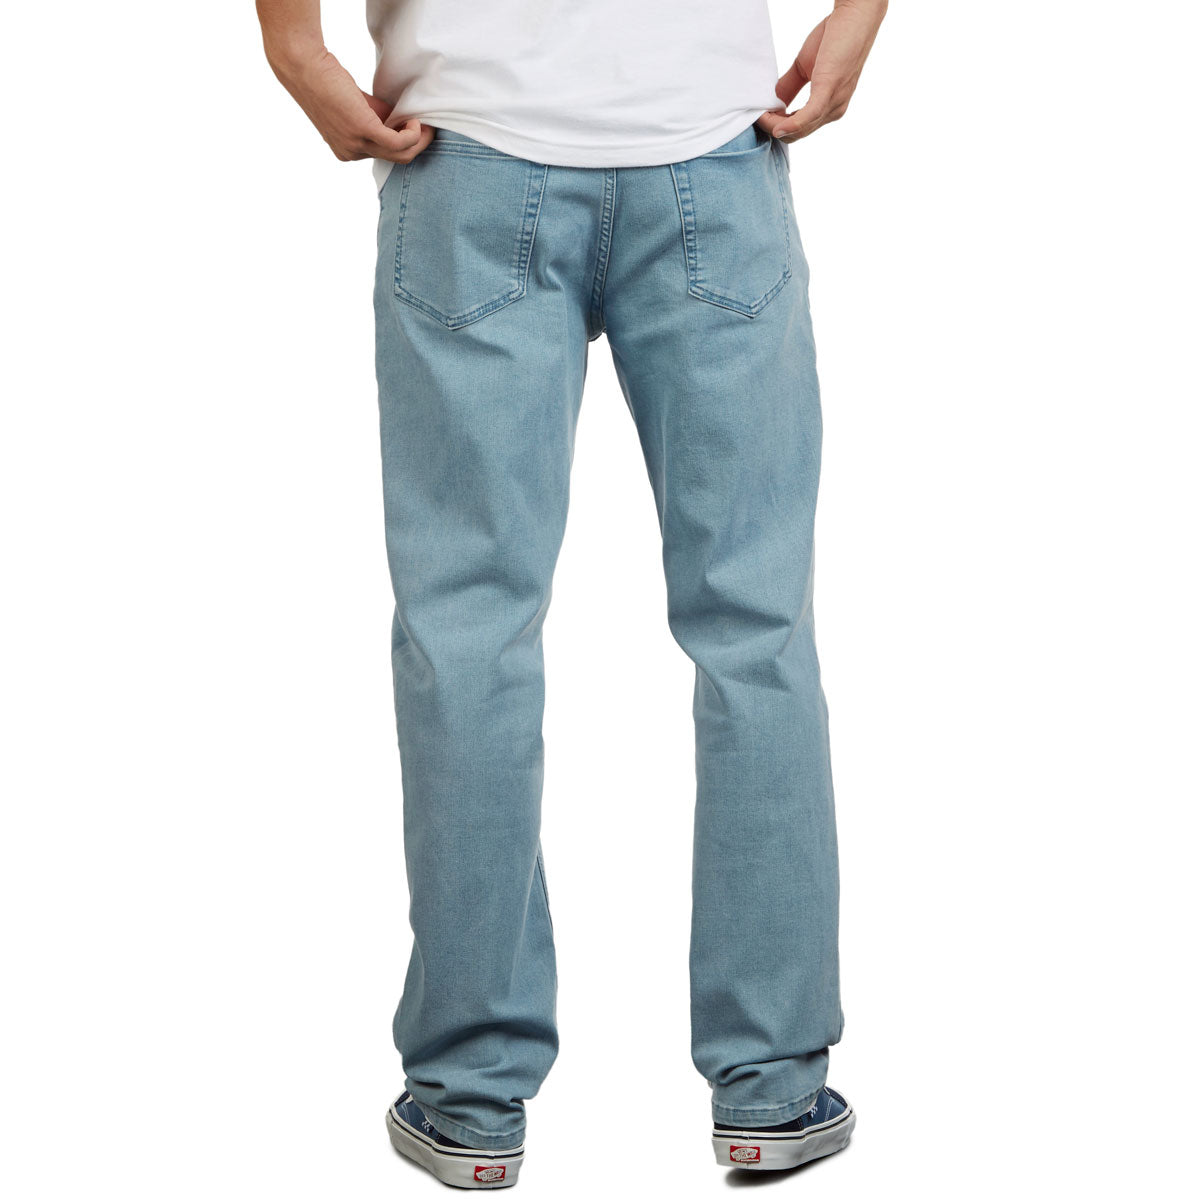 CCS Standard Plus Relaxed Denim Jeans - New Wash image 3